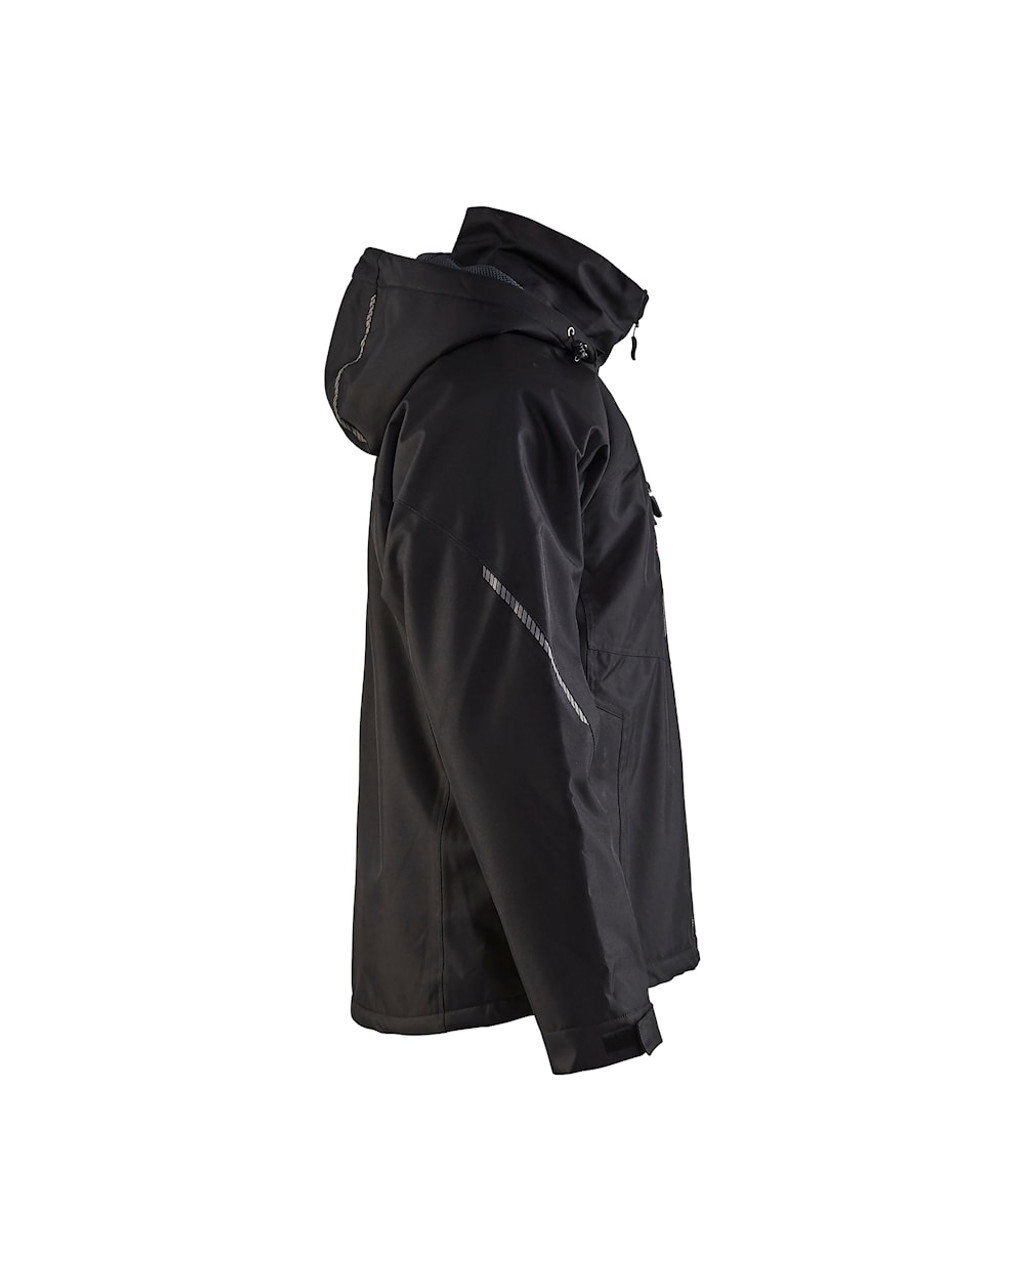 Looking for a high-quality, waterproof jacket for your next hike? Look no further than the Blaklader Men's Black Shell Jacket. This jacket is designed to keep you dry and comfortable, no matter the conditions.